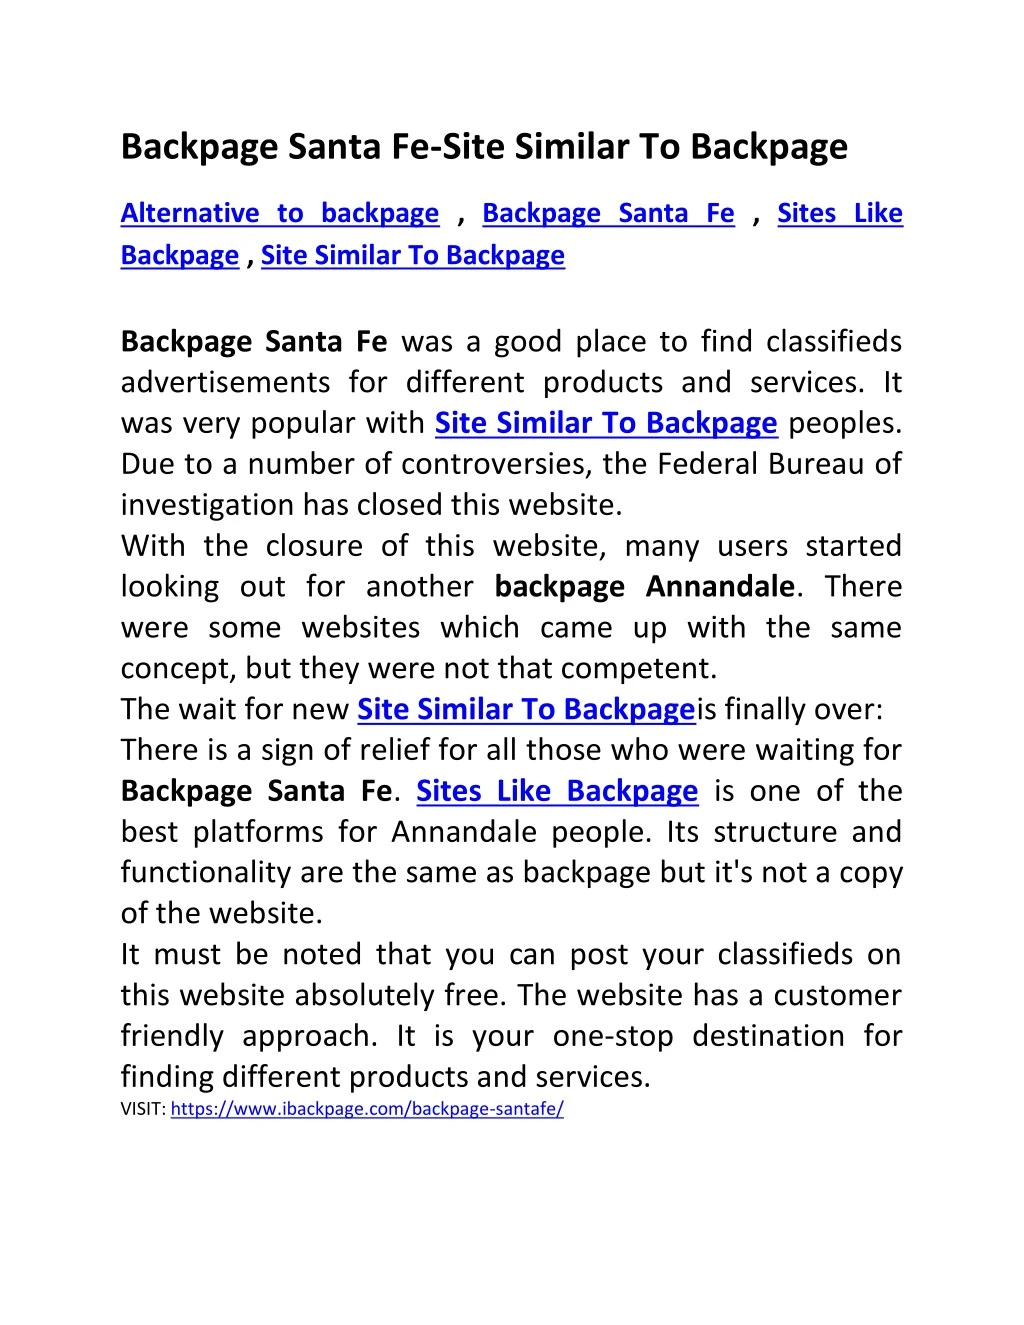 backpage santa fe site similar to backpage